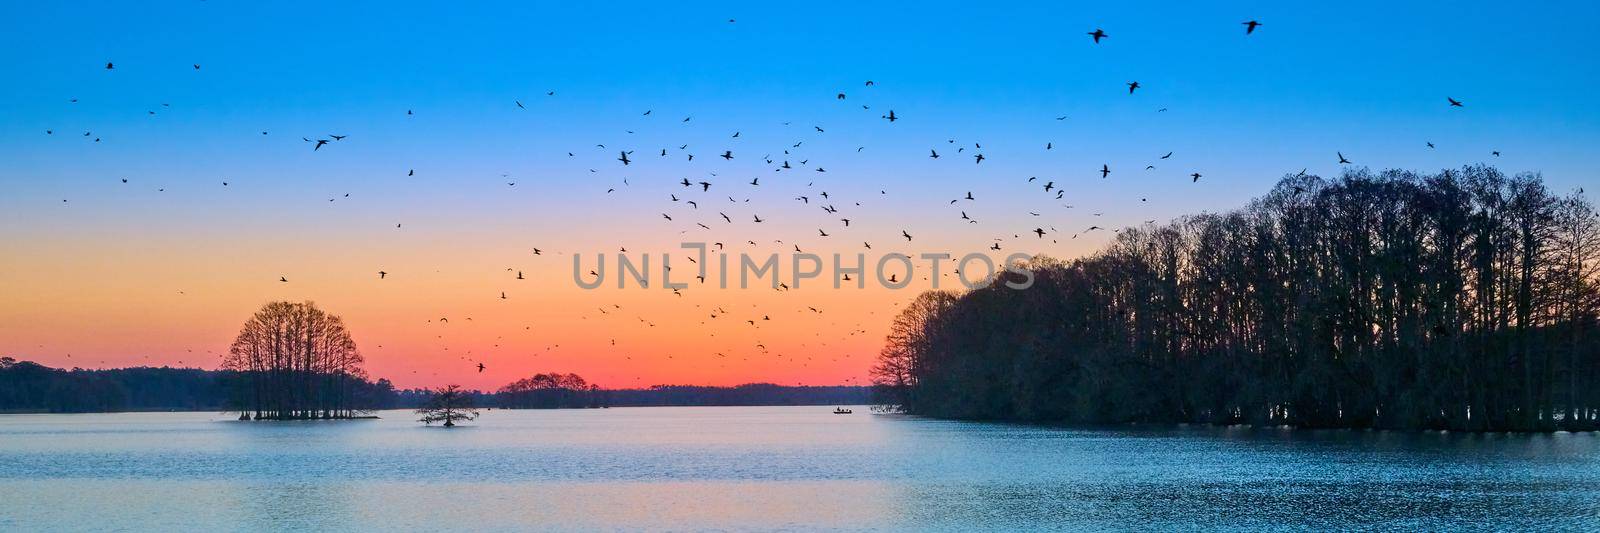 Flock of Anhingas leaving their roost in the early morining at Lake Talquin State Park near Tallahassee, FL. by patrickstock